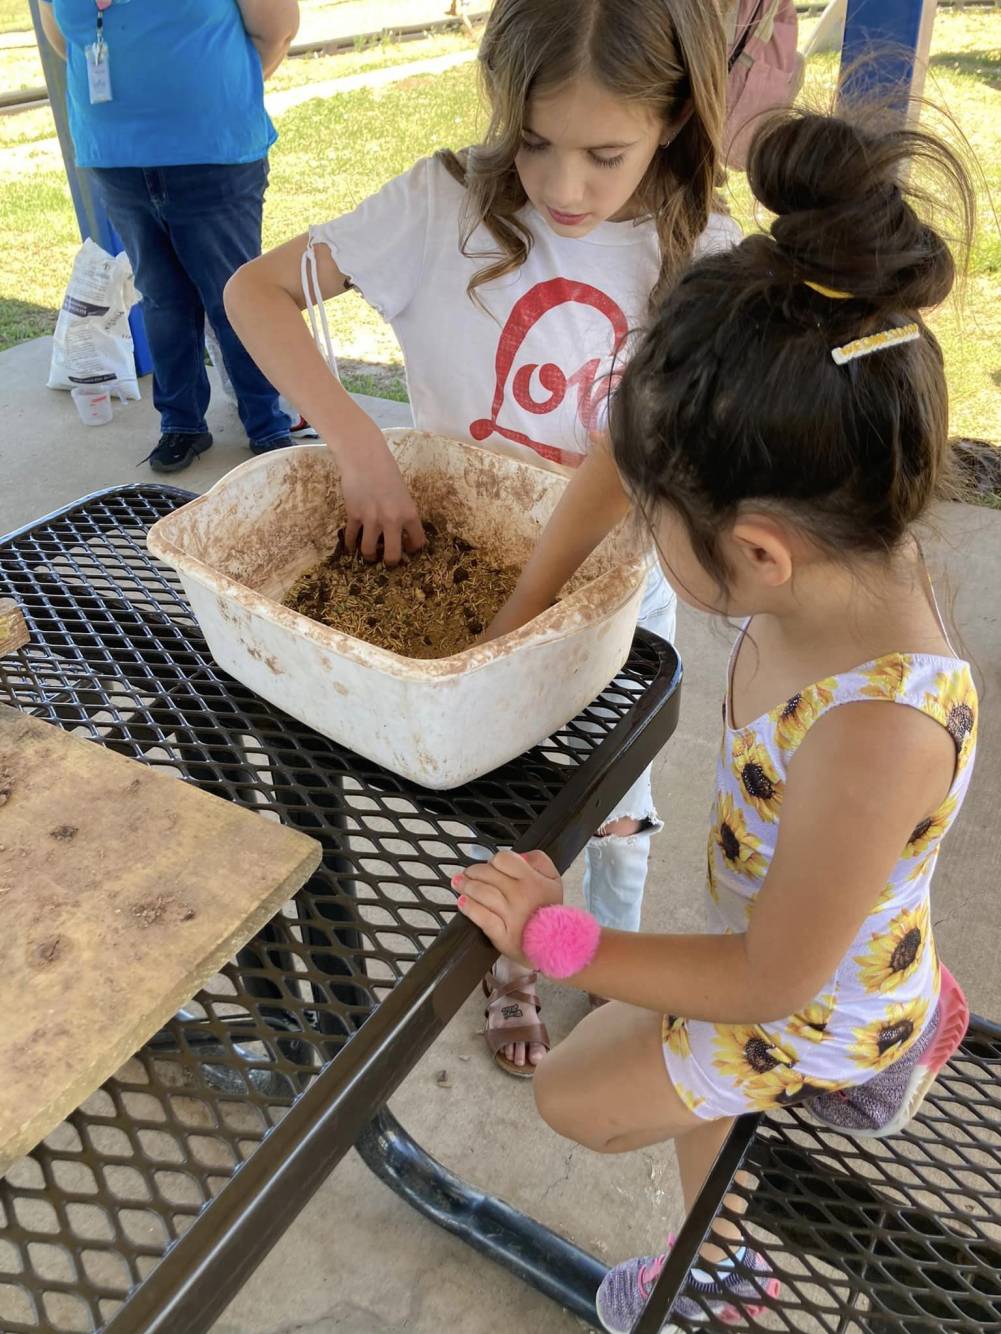 2 young girls mix seeds and soil in a plastic tub.